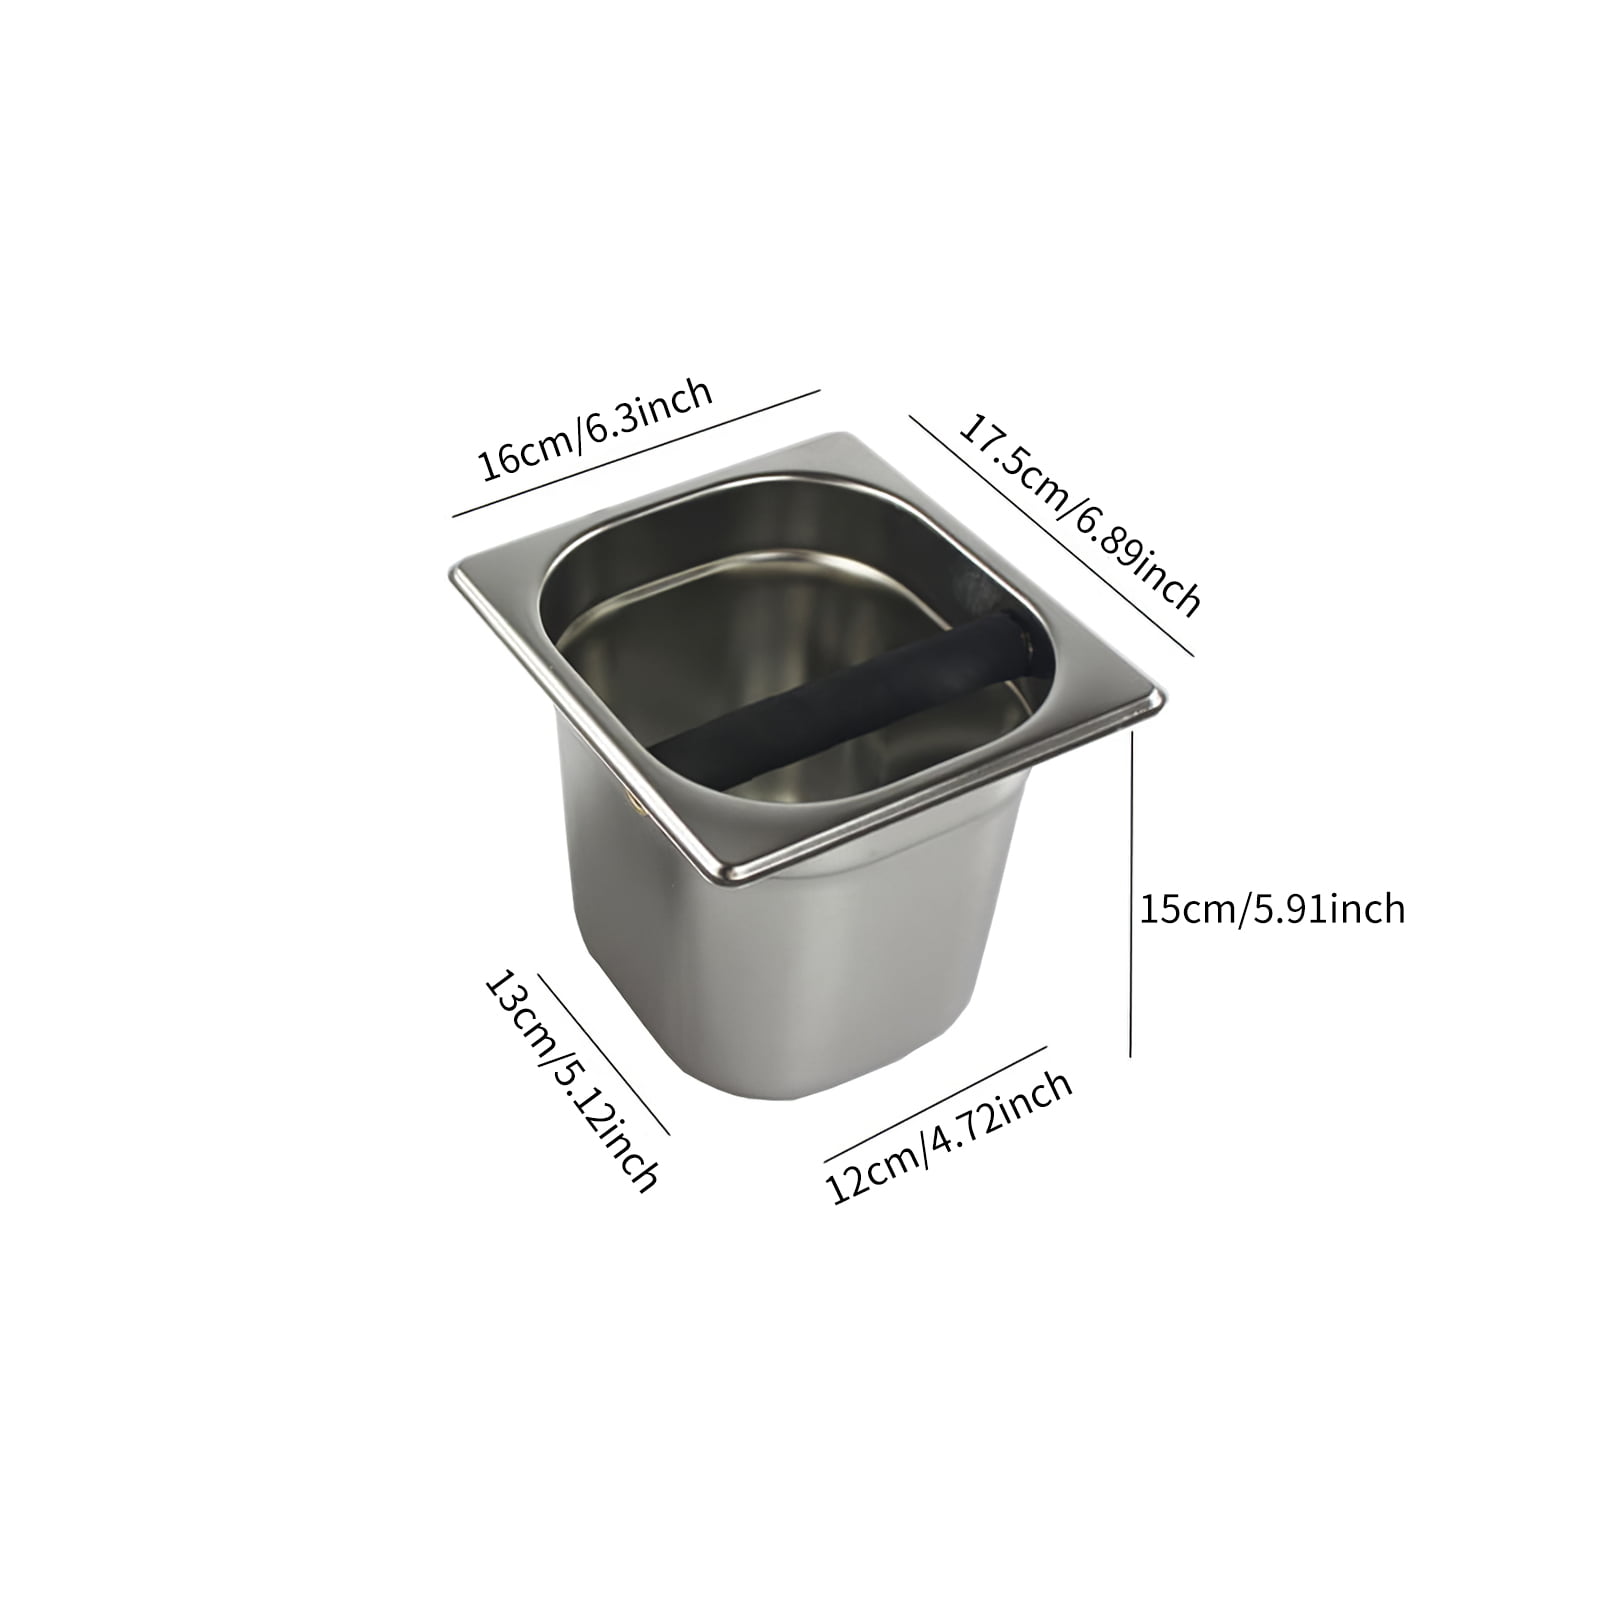 EASONGEE Knock Box,Coffee Knock Box Stainless Steel Espresso Knox Box Container with Rubber Bar Embedded Large Capacity Coffee Grounds Waste Bin Coffee Residue Bucket for Coffee Machine 